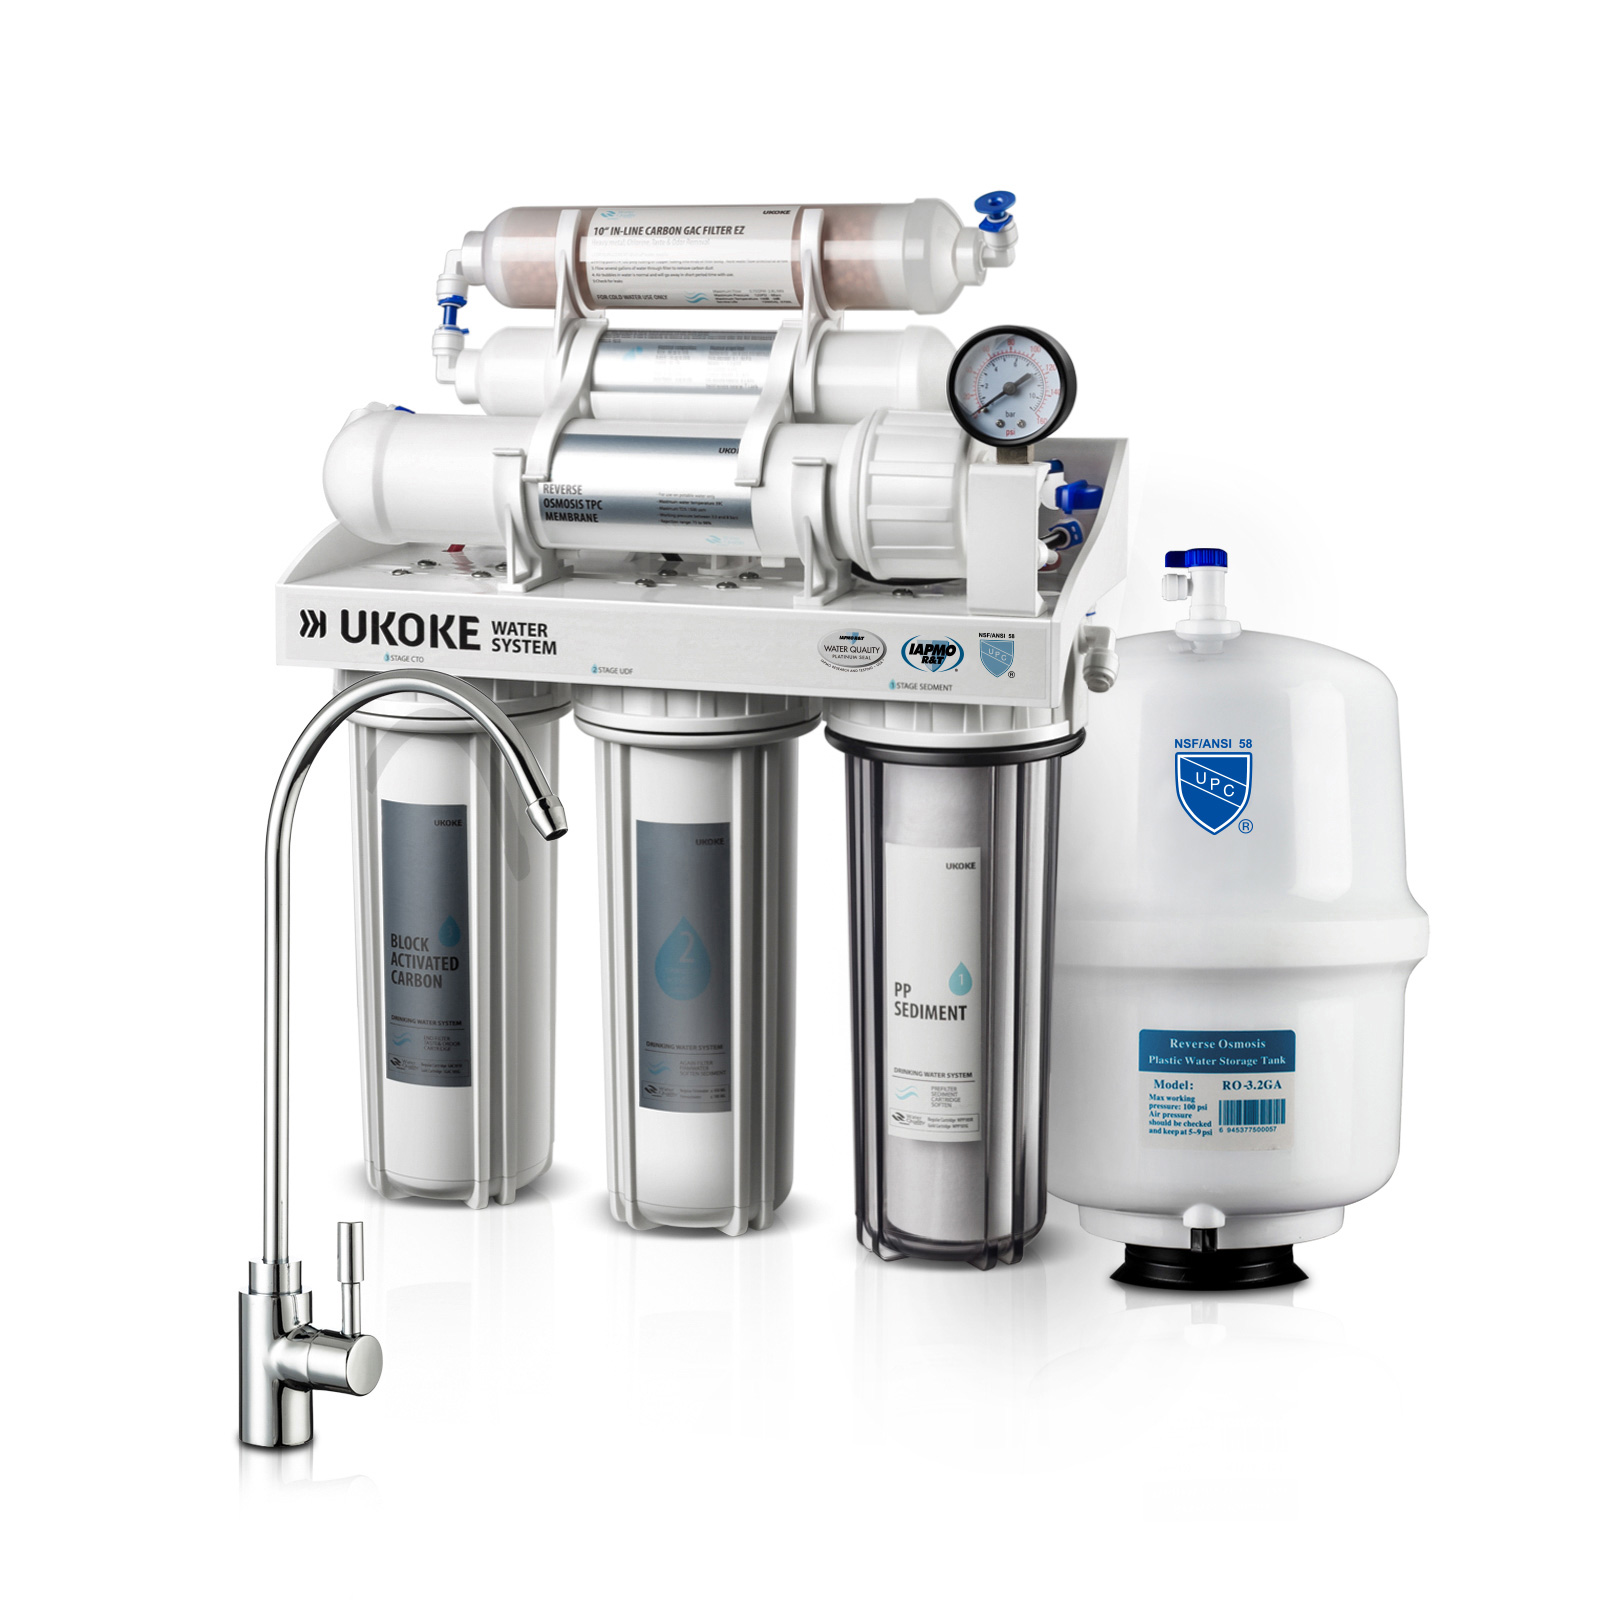 Ukoke RO8-P 6 Stages Reverse Osmosis, Water Filtration System, 75 GPD without Pump $129 +FS